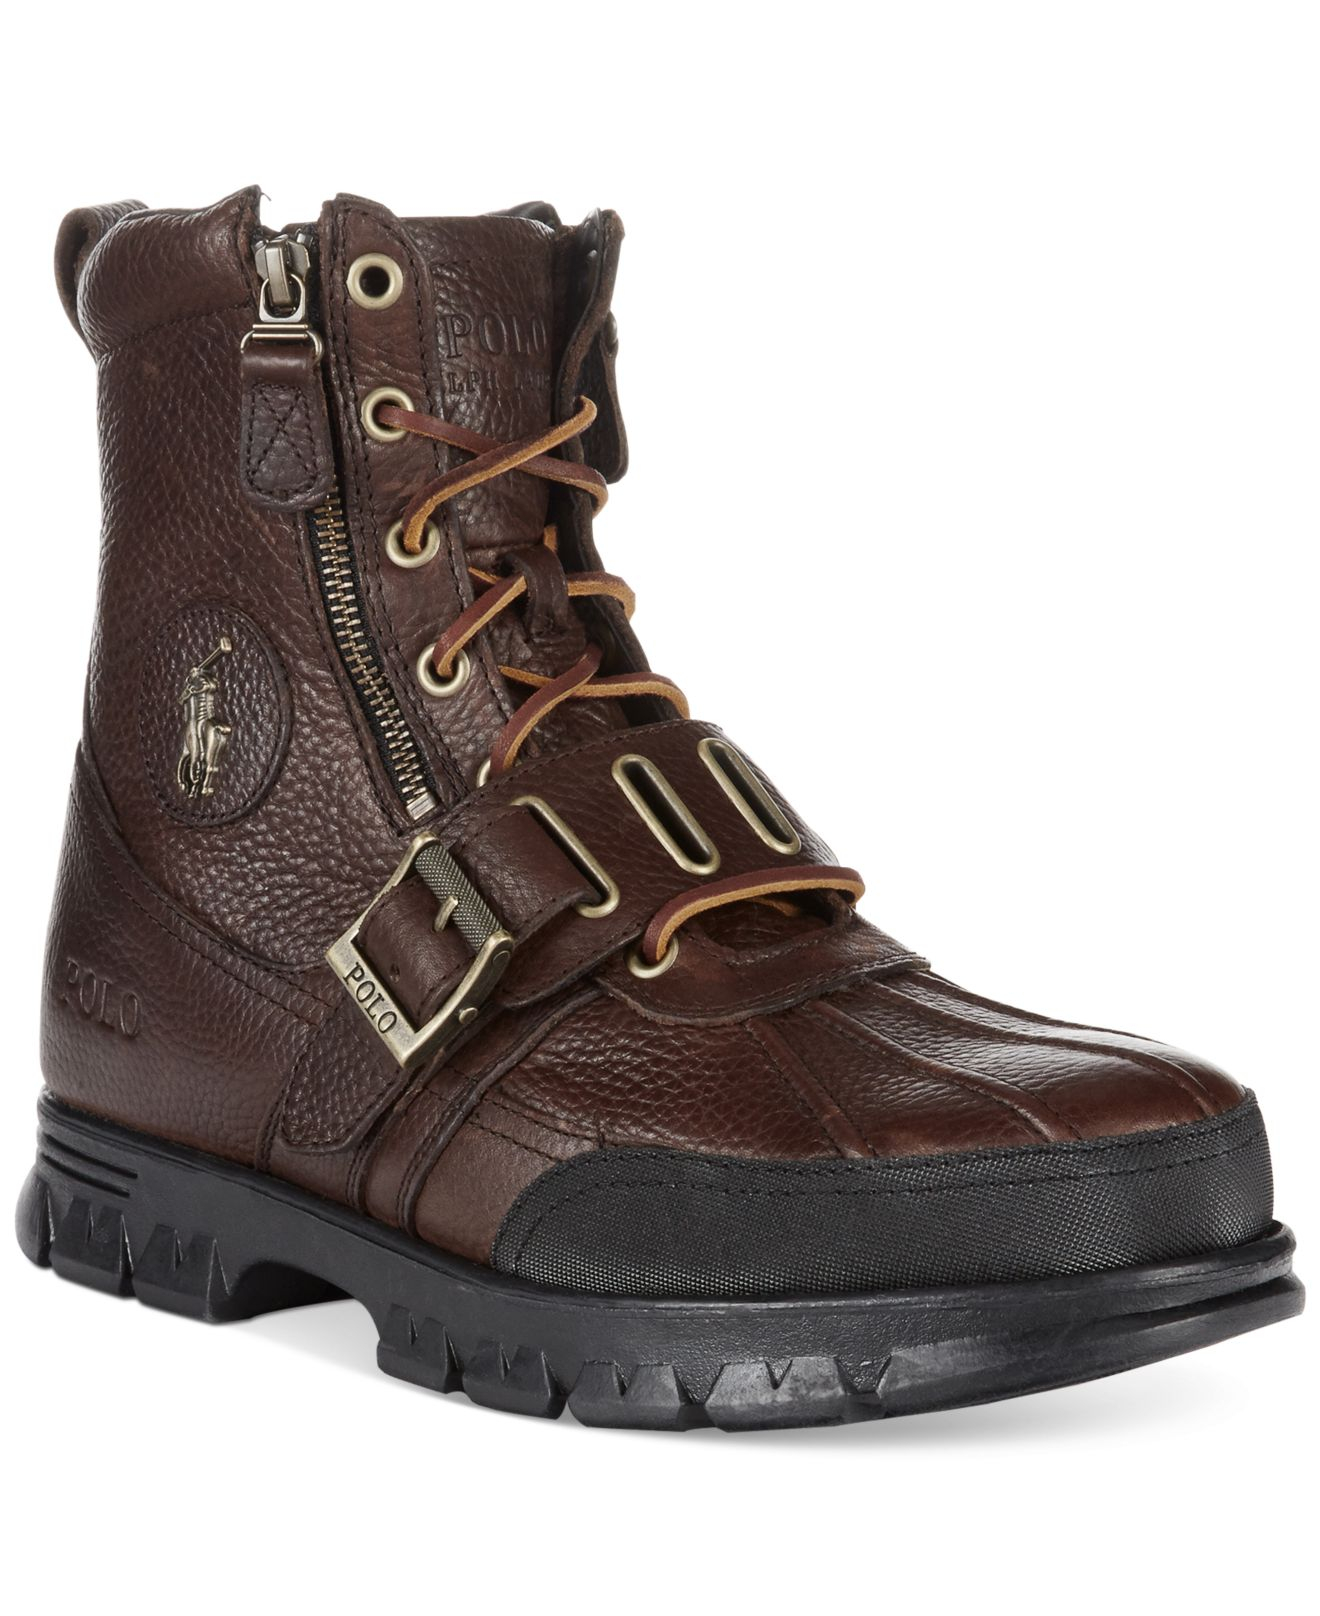 Polo Ralph Lauren Leather Andres Iii Boots in Brown for Men - Lyst